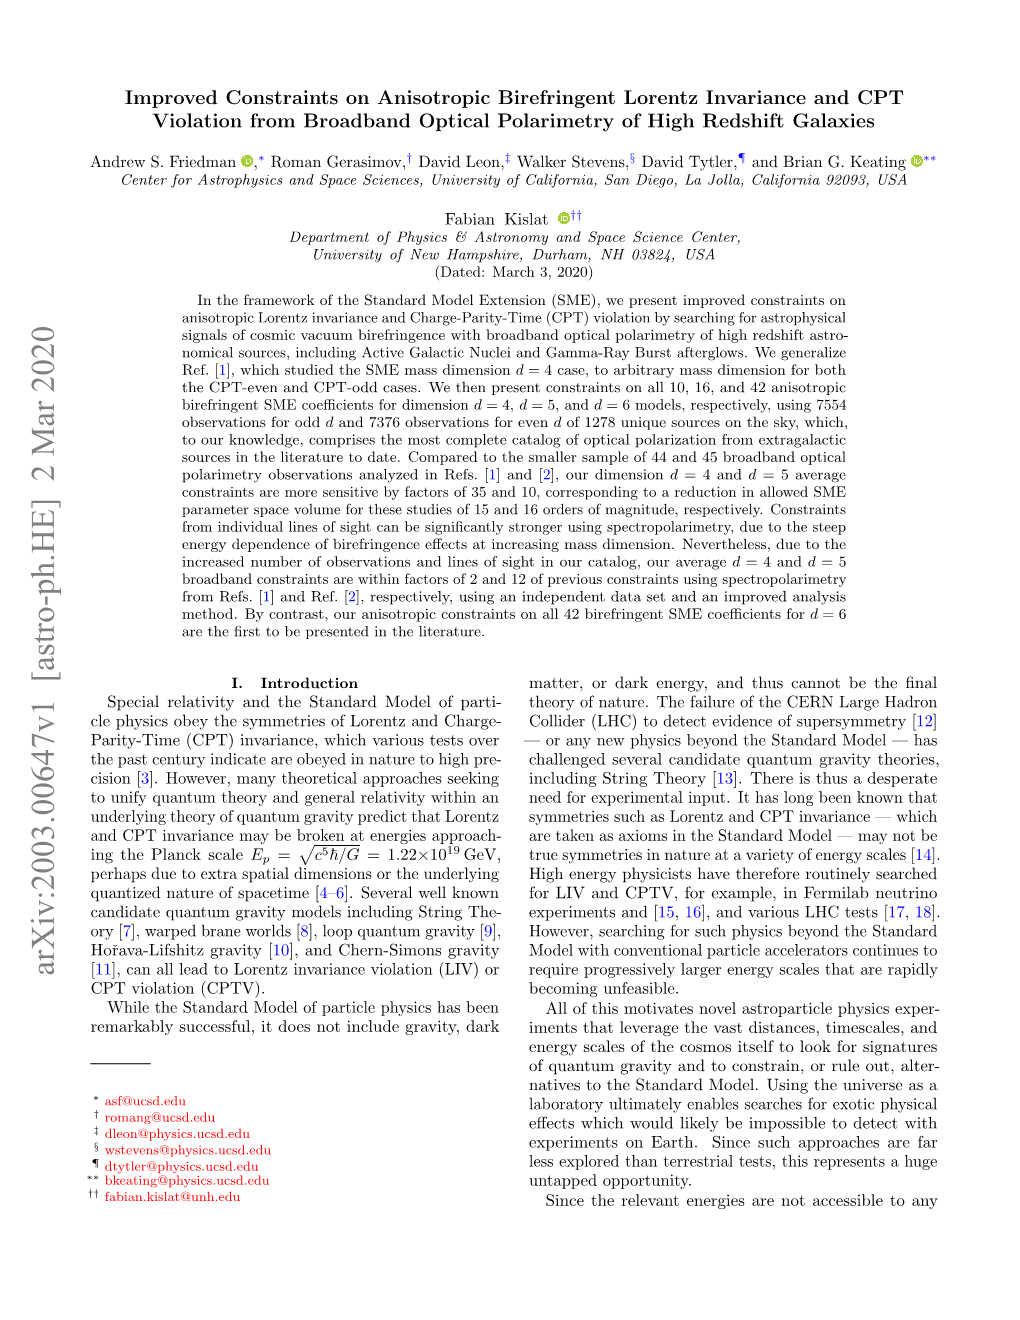 Improved Constraints on Anisotropic Birefringent Lorentz Invariance and CPT Violation from Broadband Optical Polarimetry of High Redshift Galaxies